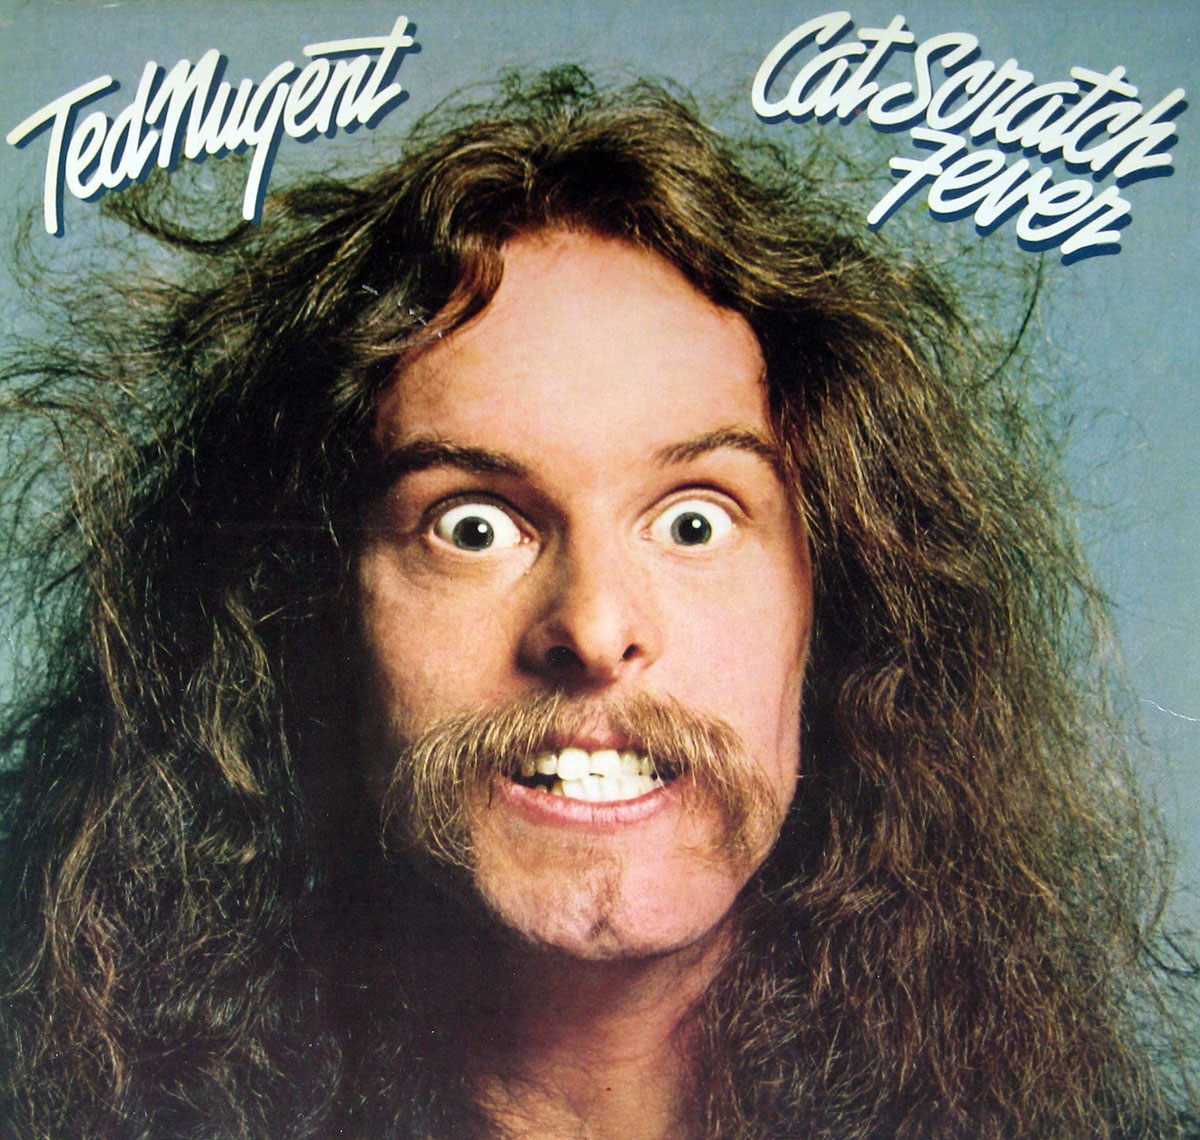 High Resolution Photos of ted nugent cat scratch fever 